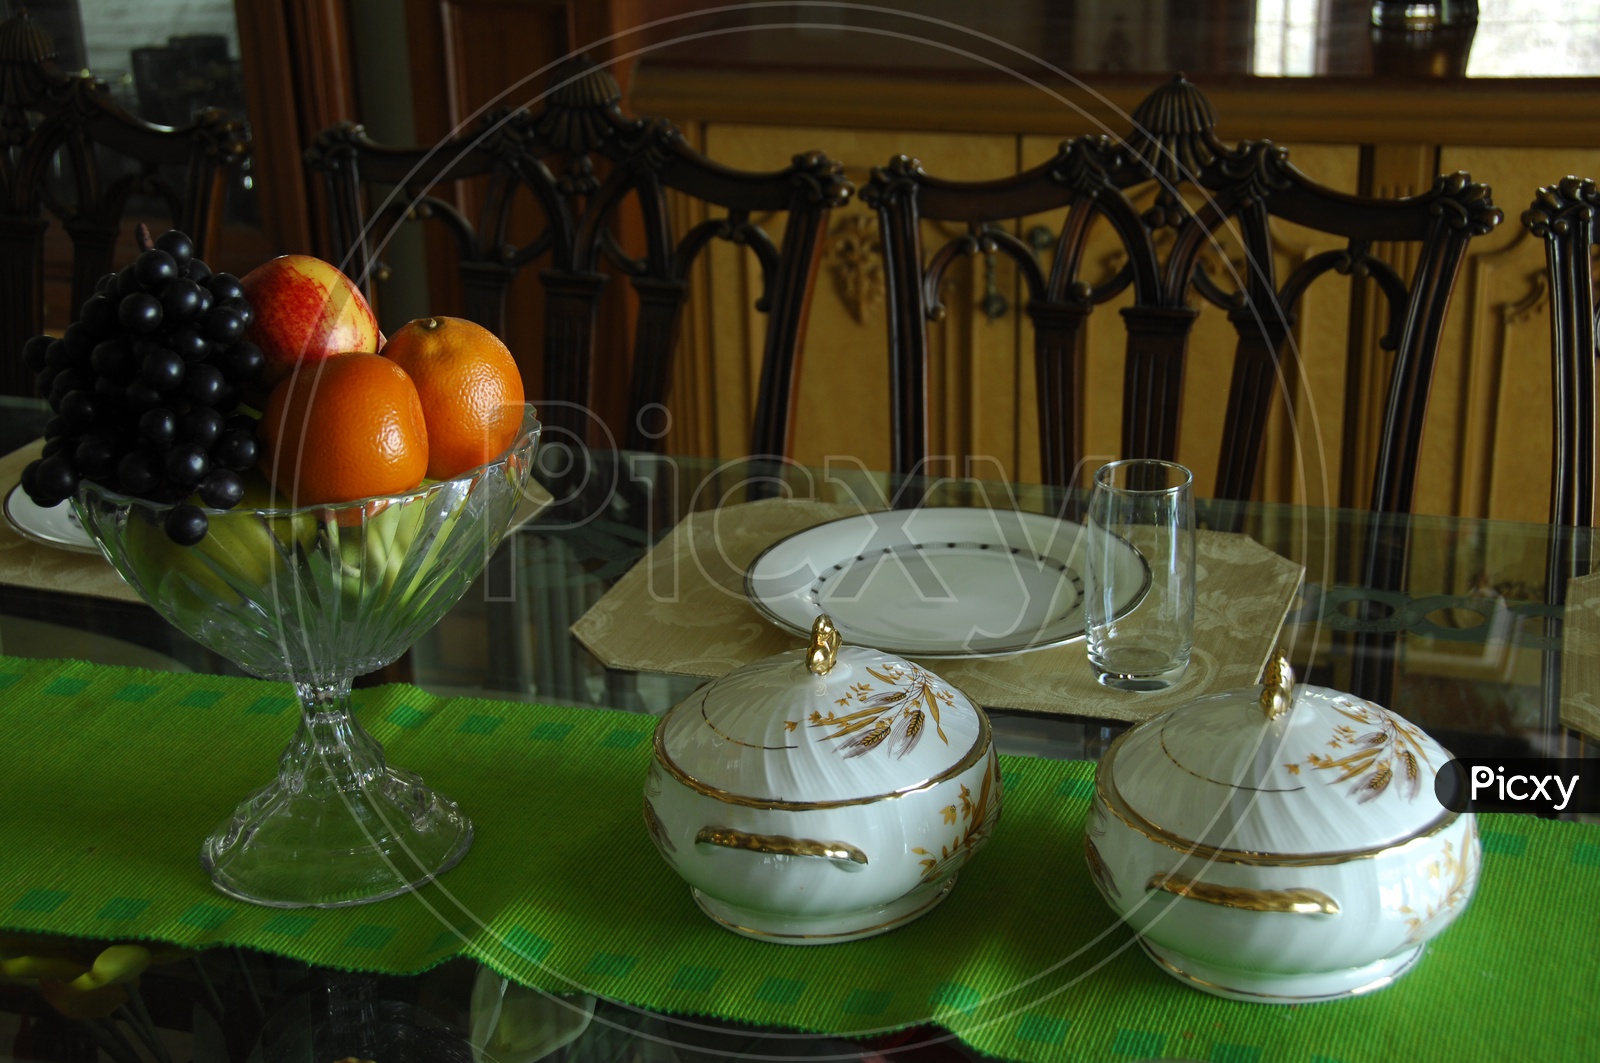 Photograph of Dining table with fresh fruits in a glass bowl